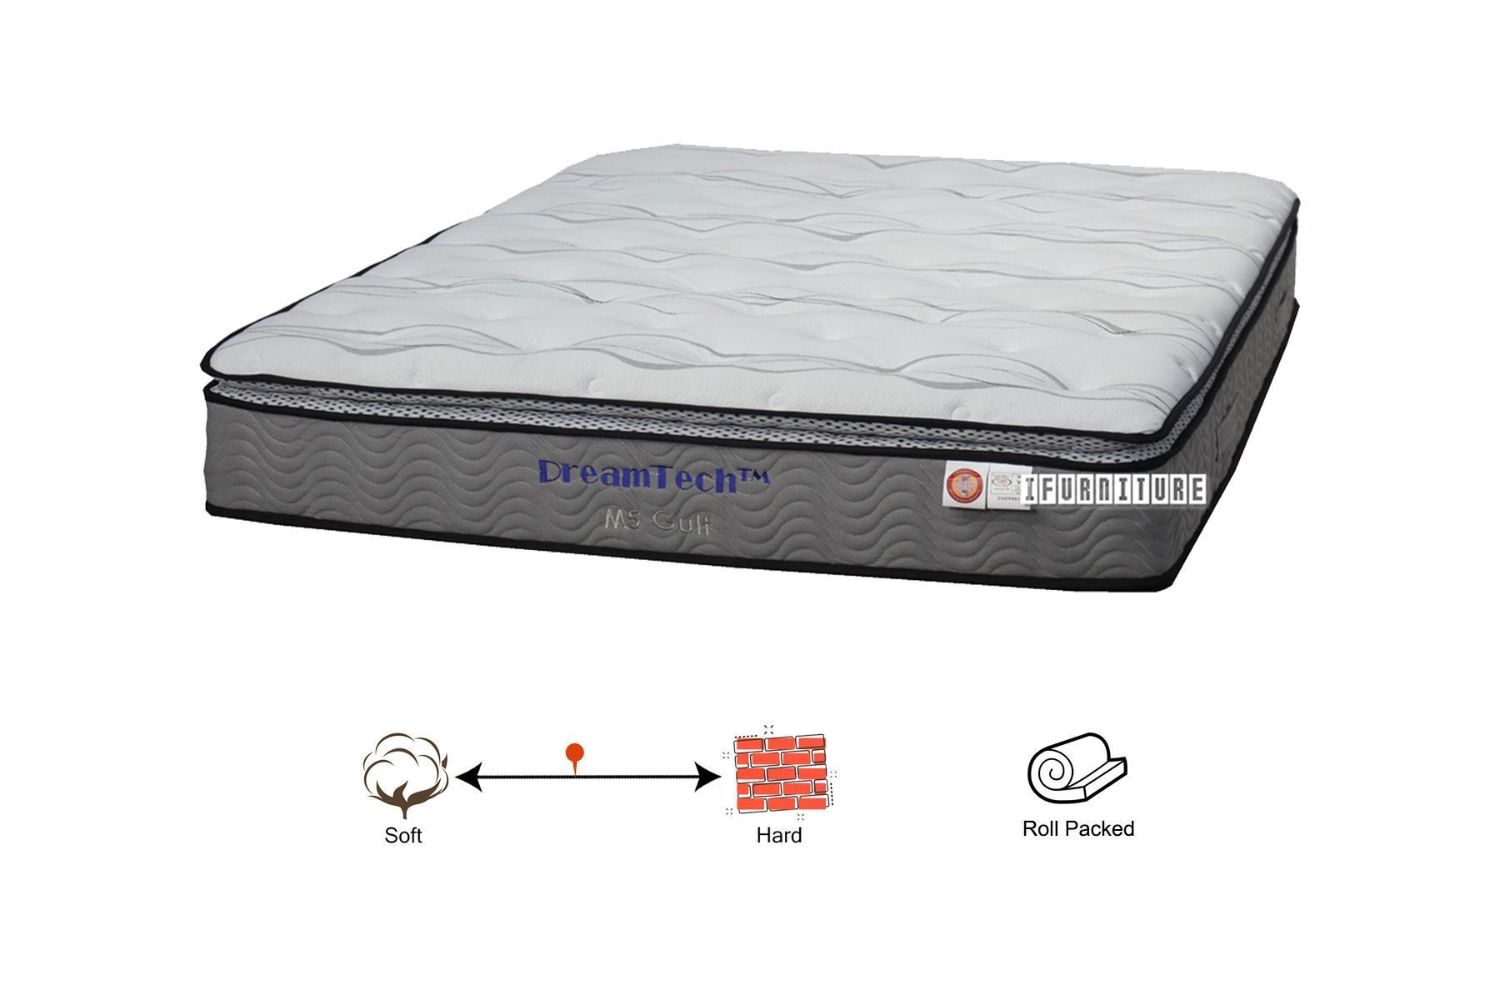 M5 GULF Pocket Spring Mattress in Single/Double/Queen/King/Super King